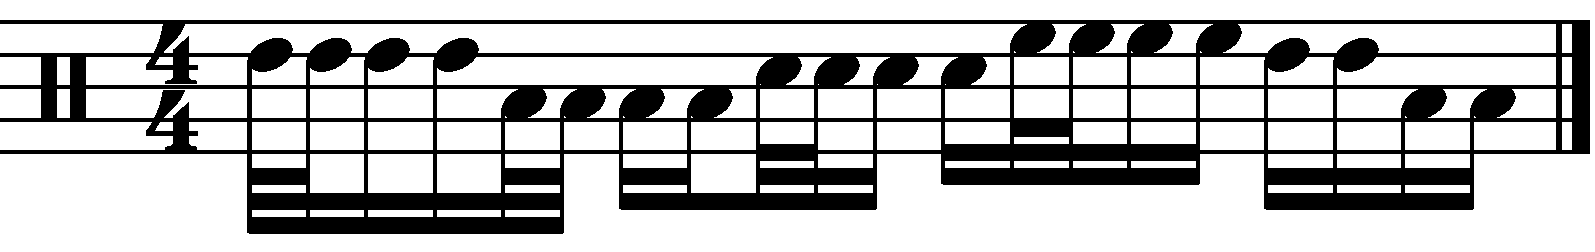 Syncopated 16th note 43333 fills with decorative 32nds